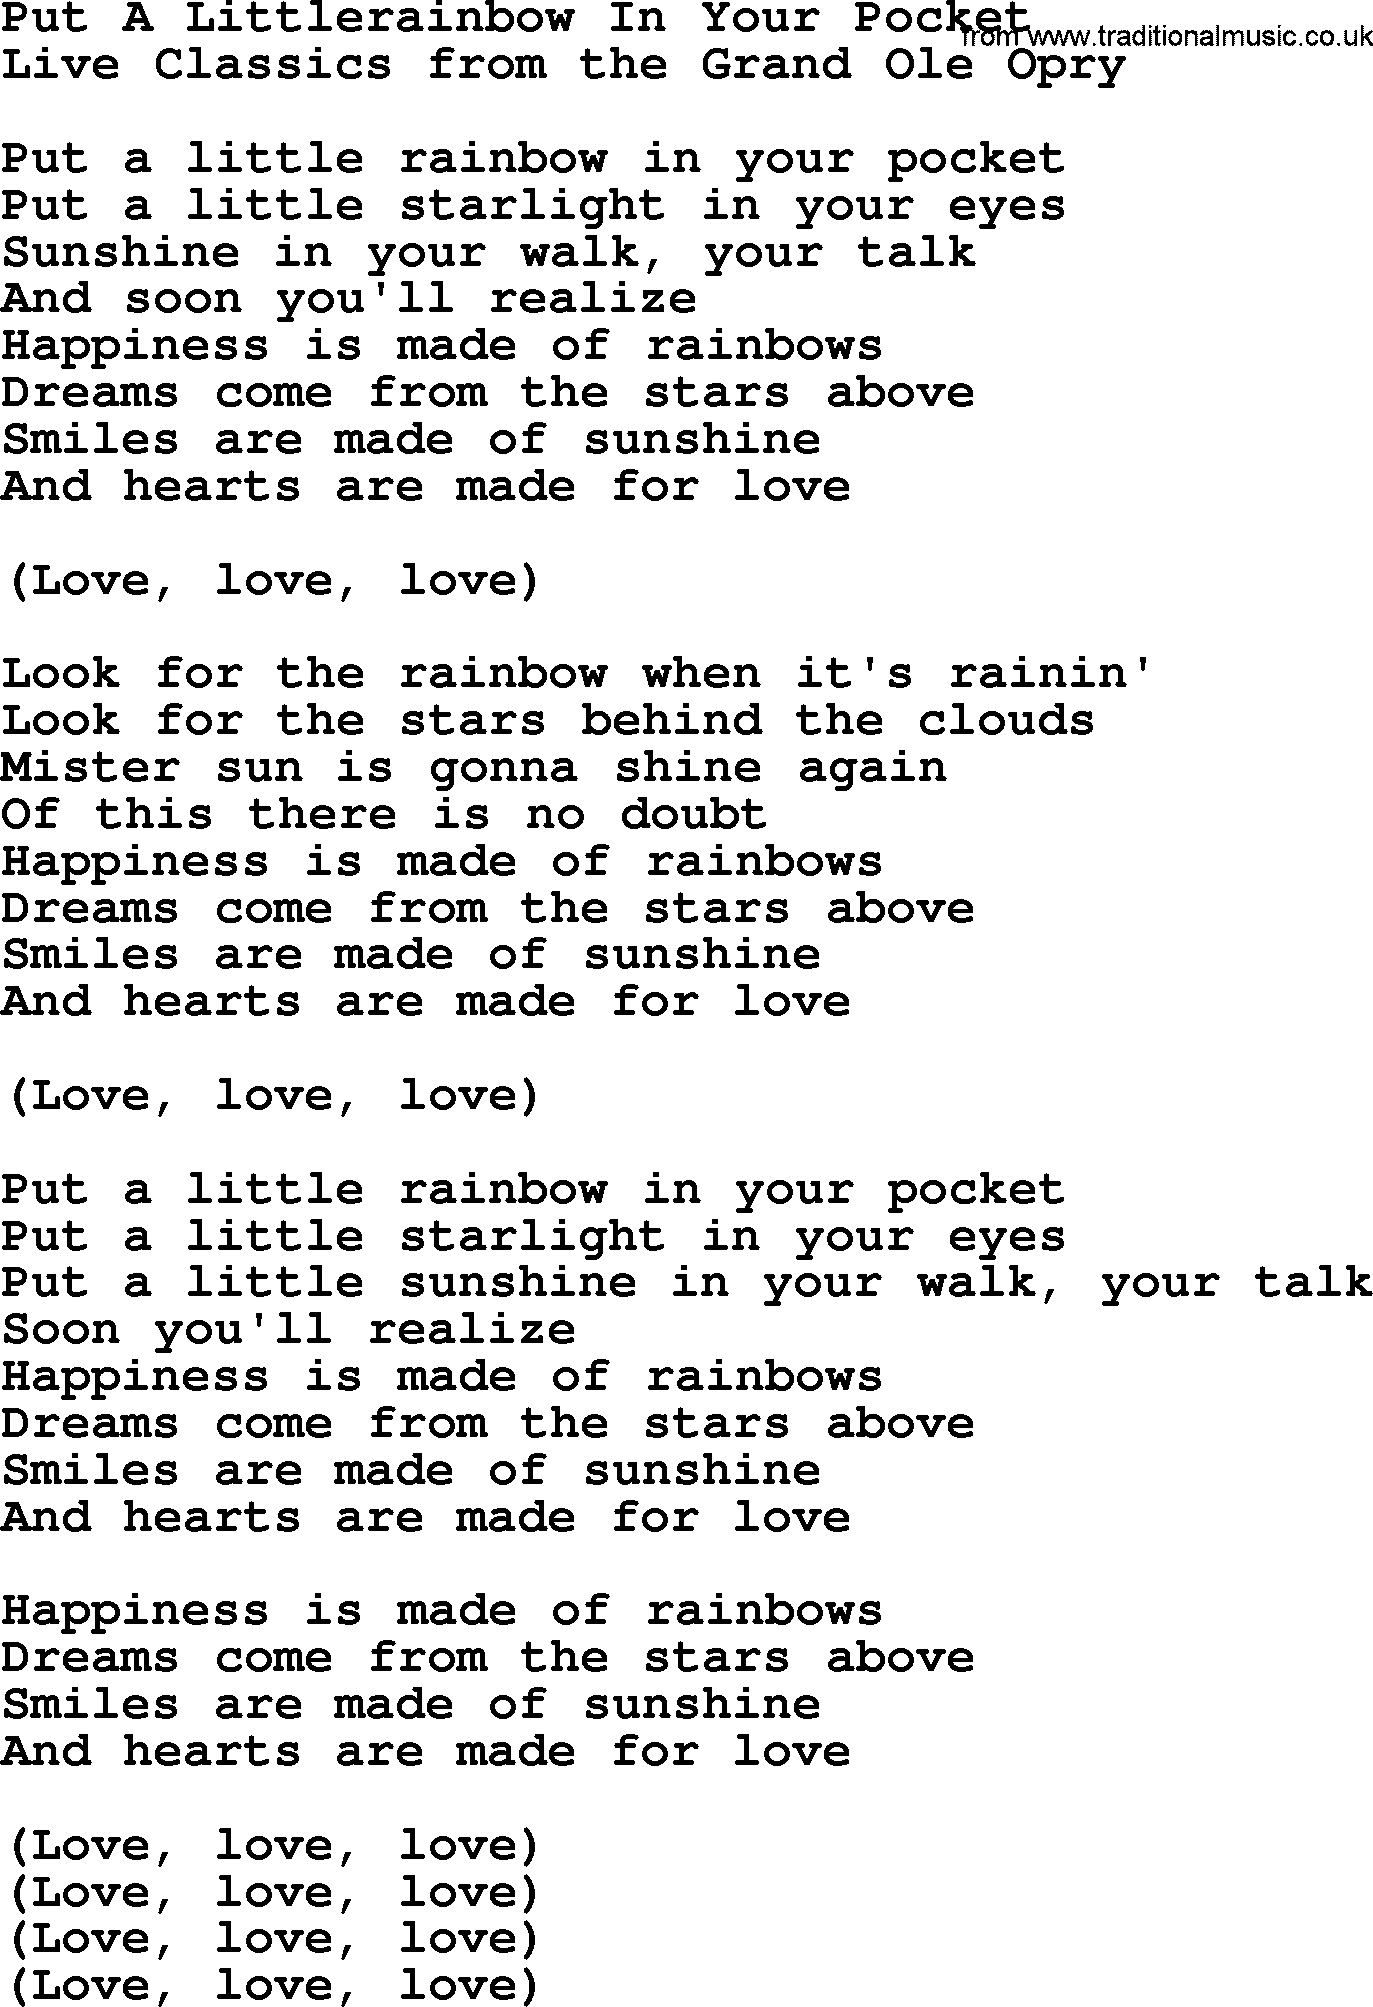 Marty Robbins song: Put A Littlerainbow In Your Pocket, lyrics